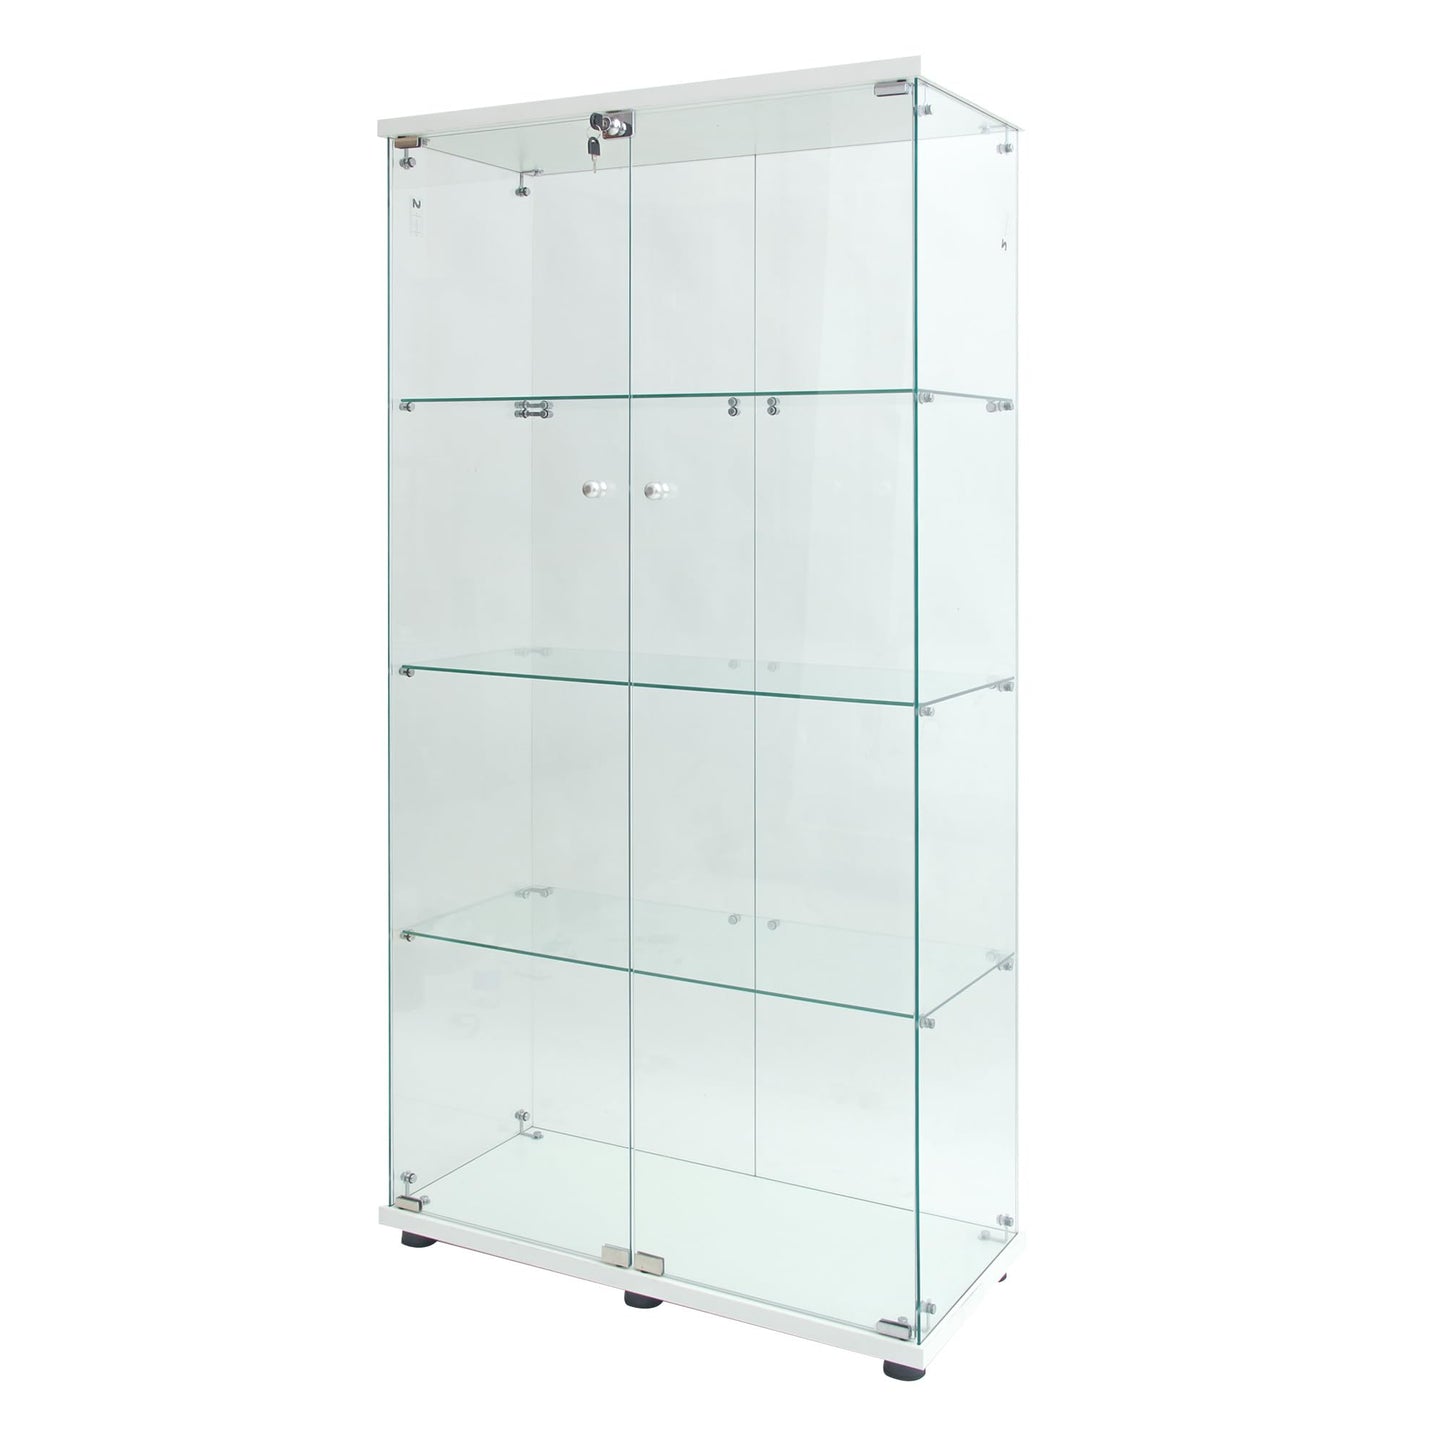 Zipzop Modern 64.5'' Glass Display Cabinet in Clear with Lock and Lights, Lighted Curio Cabinet Collection Display Case, Floor Standing Showcase for